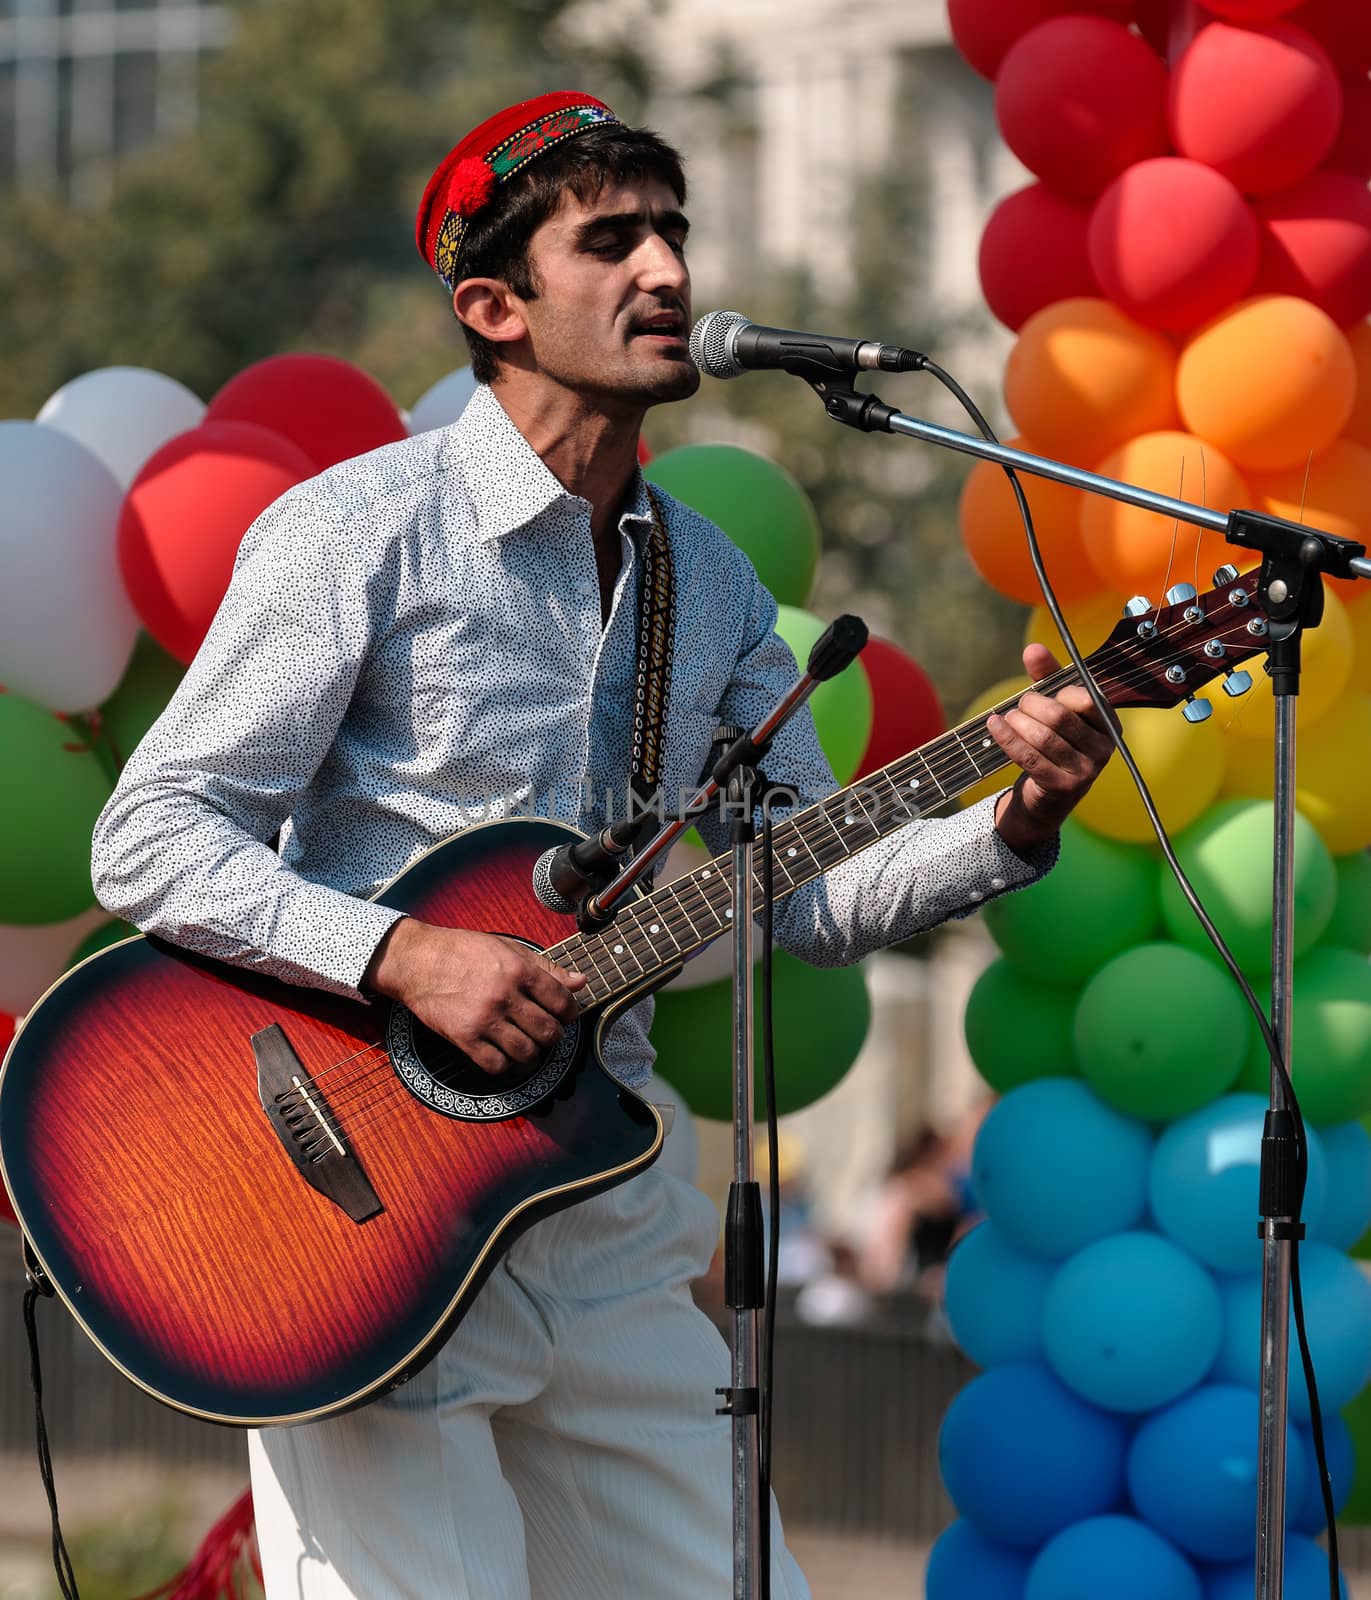 August 30st, 2011 - The annual celebration of Tatarstan Republic Day in Kazan is a colourful event, where the numerous local ethnics groups in traditional costumes perform in dances and singings. In this picture a Tajik guitar player.